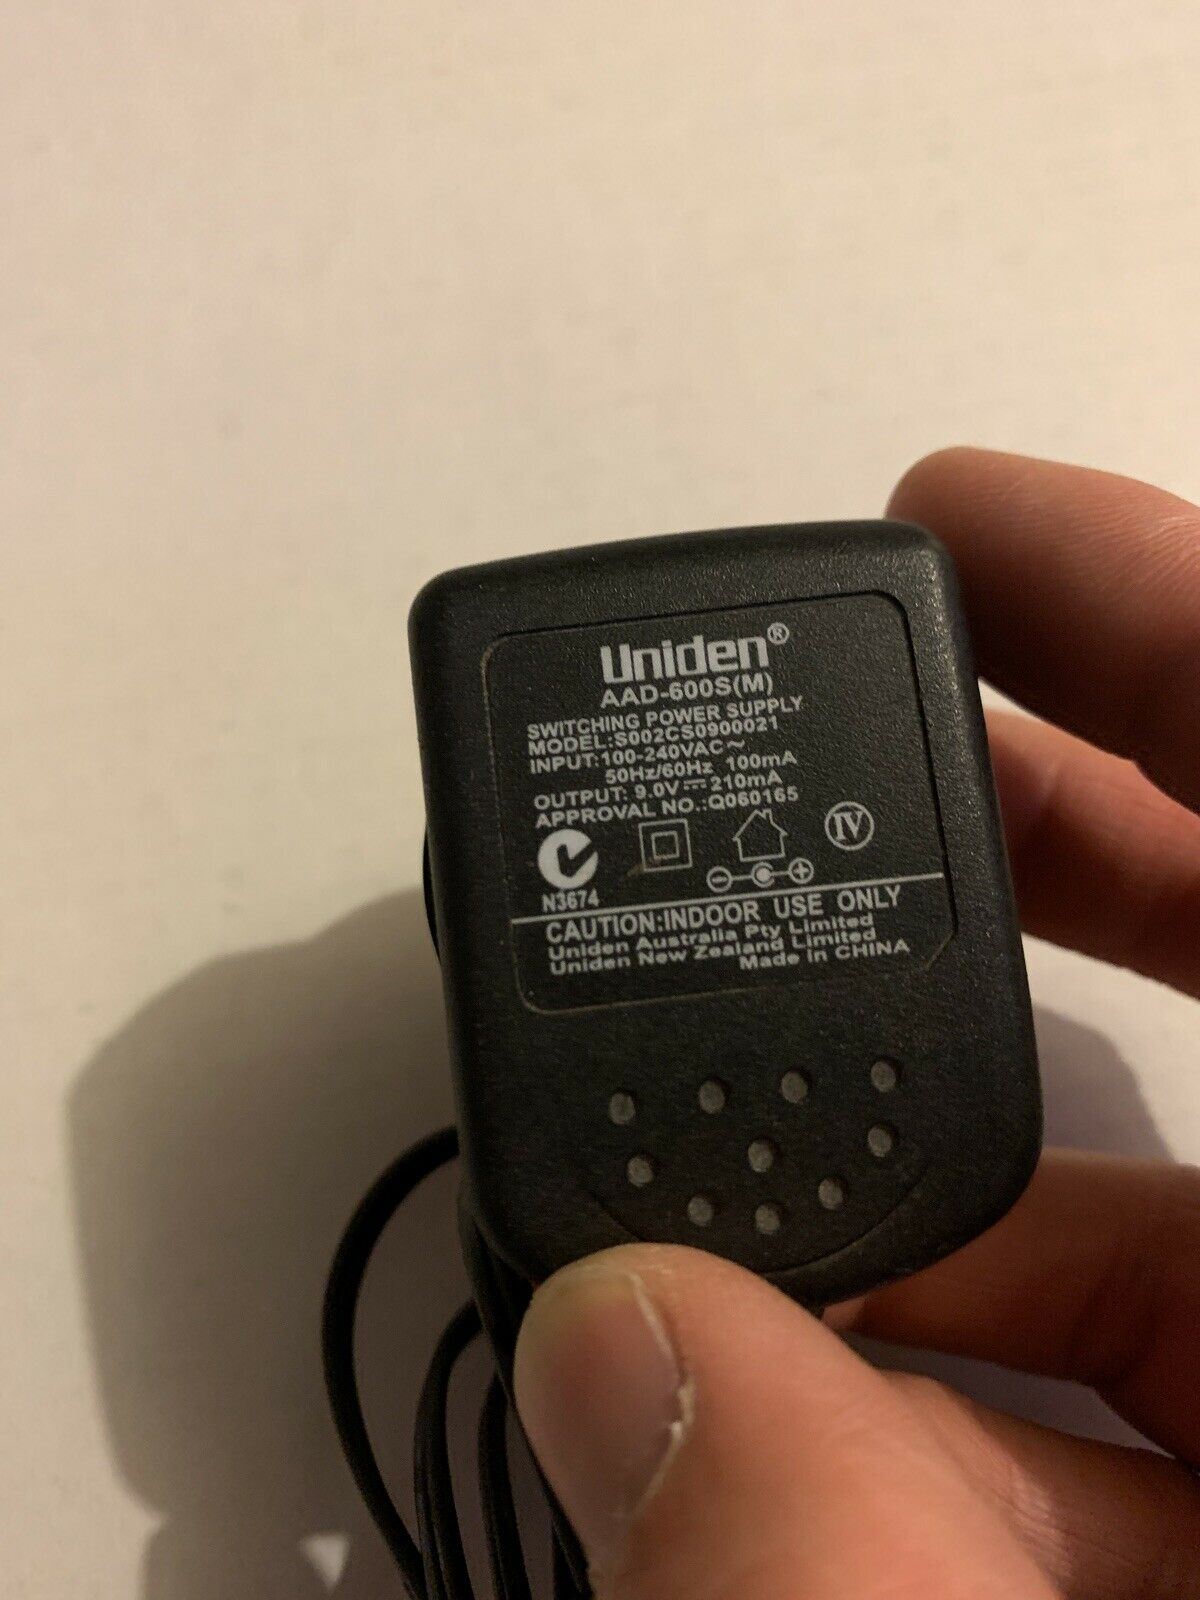 Genuine Uniden AAD-600S(M) AC Adapter 9V 210mA